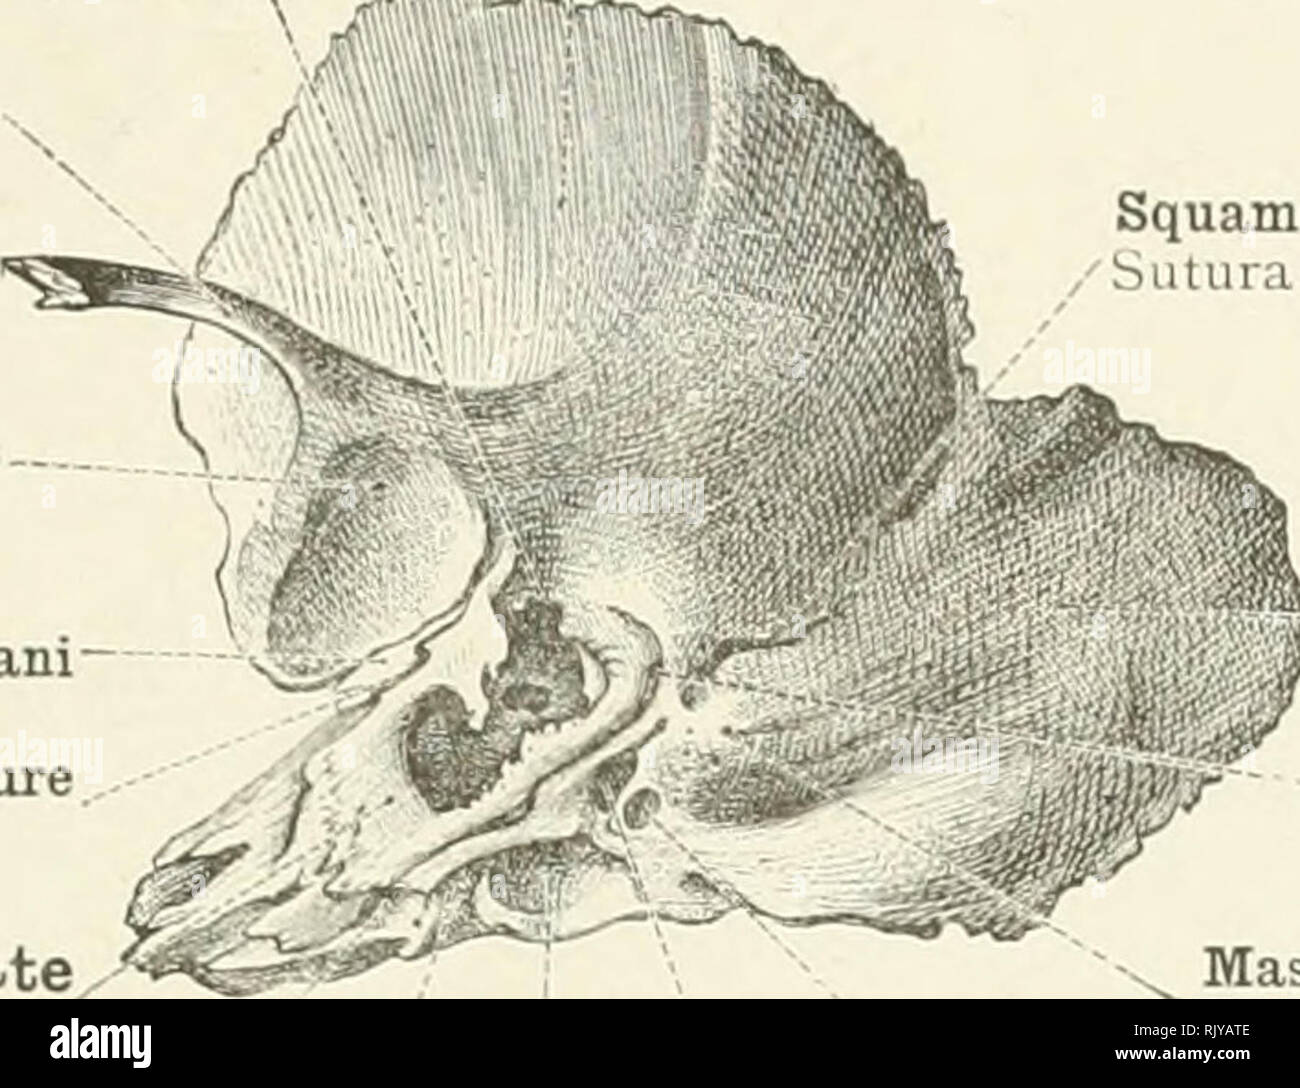 . An atlas of human anatomy for students and physicians. Anatomy. THE SKULL AND THE BONES OF THE SKULL 71 Notch of Rivinus Incisura tympanica (Rivini) Zygoma Processus zygomaticus Articular portion of glenoid fossa Facies articularis Free margin of tegmen tympani Fissure of Glaser, or petrotympanic fissure Fissura petrotympanica (Glaseri) Squamous portion of temporal bone ] Squama temporalis  sT^—p.. Squamosomastoid suture Sutura squamosomastoidea Mastoid portion Pars mastoidea ..Tympanomastoid fissure F'issura tympanomastoidea Jugular Mastoid process Processus mastoideus Tympanic plate Pars  Stock Photo